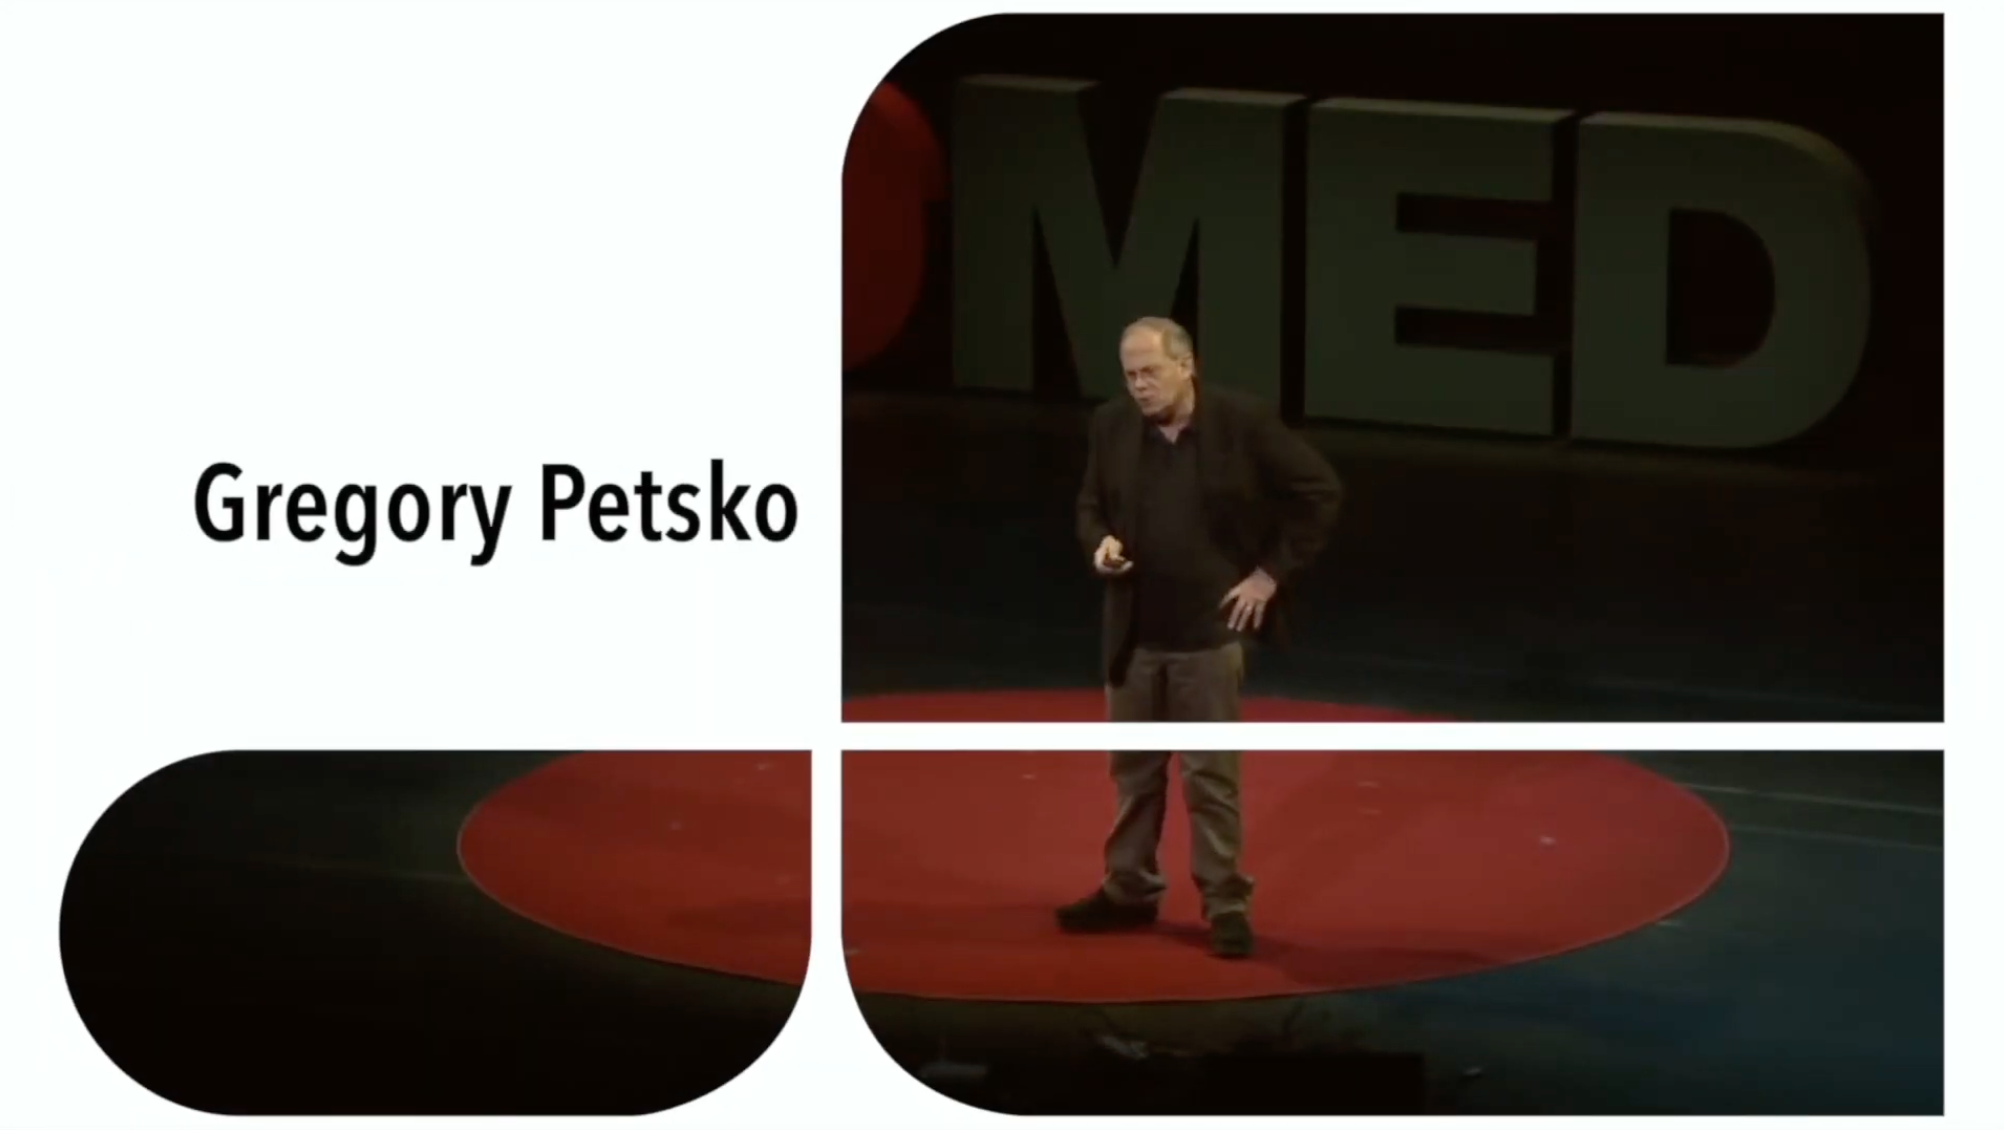 Title screen says "Gregory Petsko" in one corner. Three stylized boxes reveal Petsko standing on a dark stage beneath a spotlight, presumably giving a talk